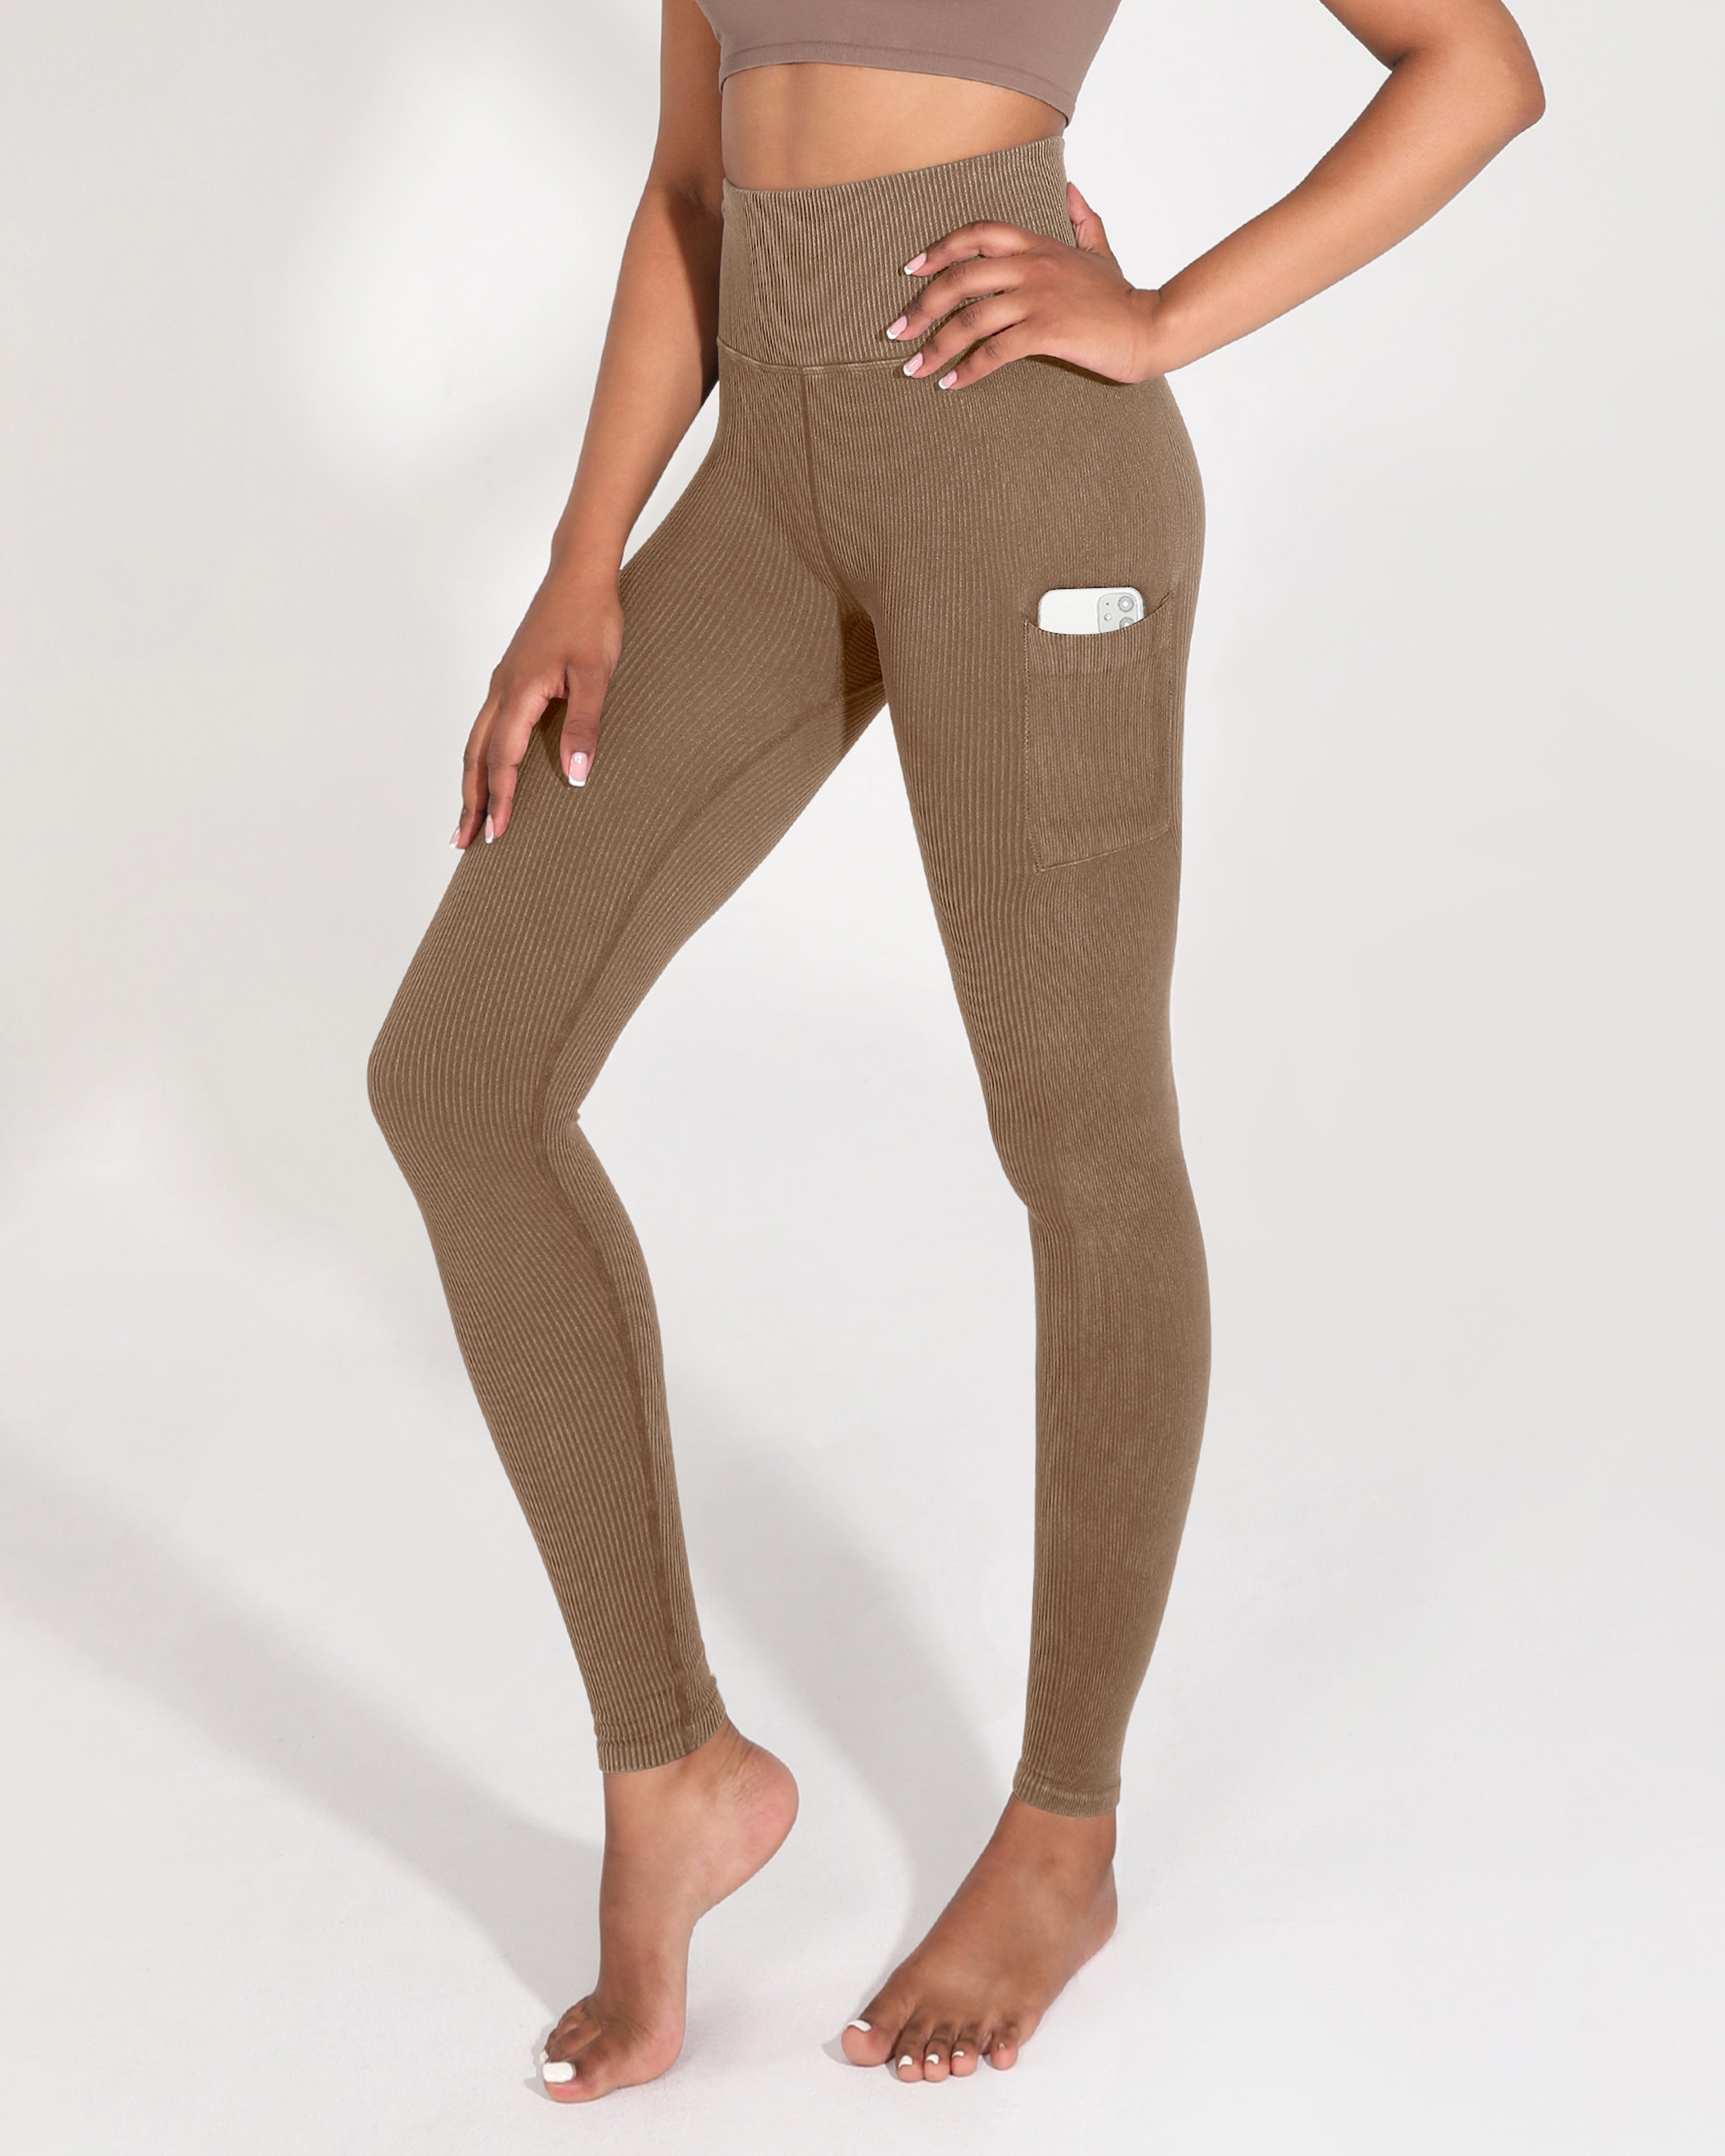 Seamless Soft Workout Tights – YogaDoesWonders